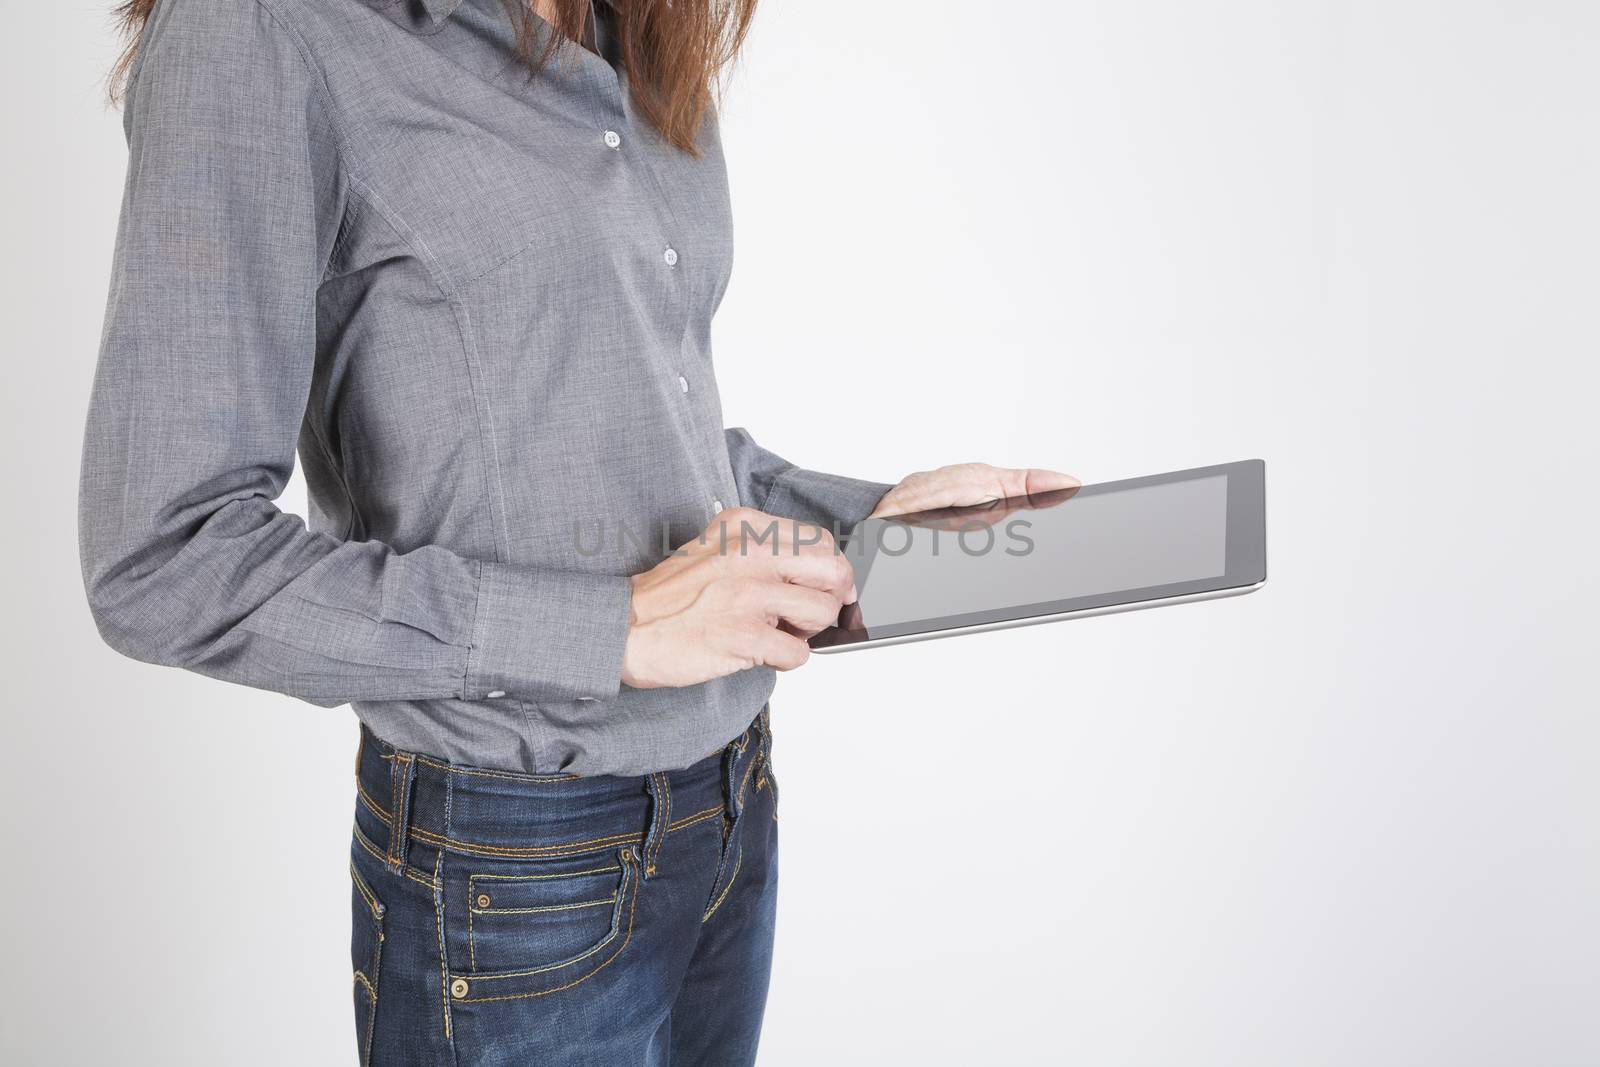 woman blue jeans trousers and grey shirt with digital tablet blank screen in her hand isolated over white background